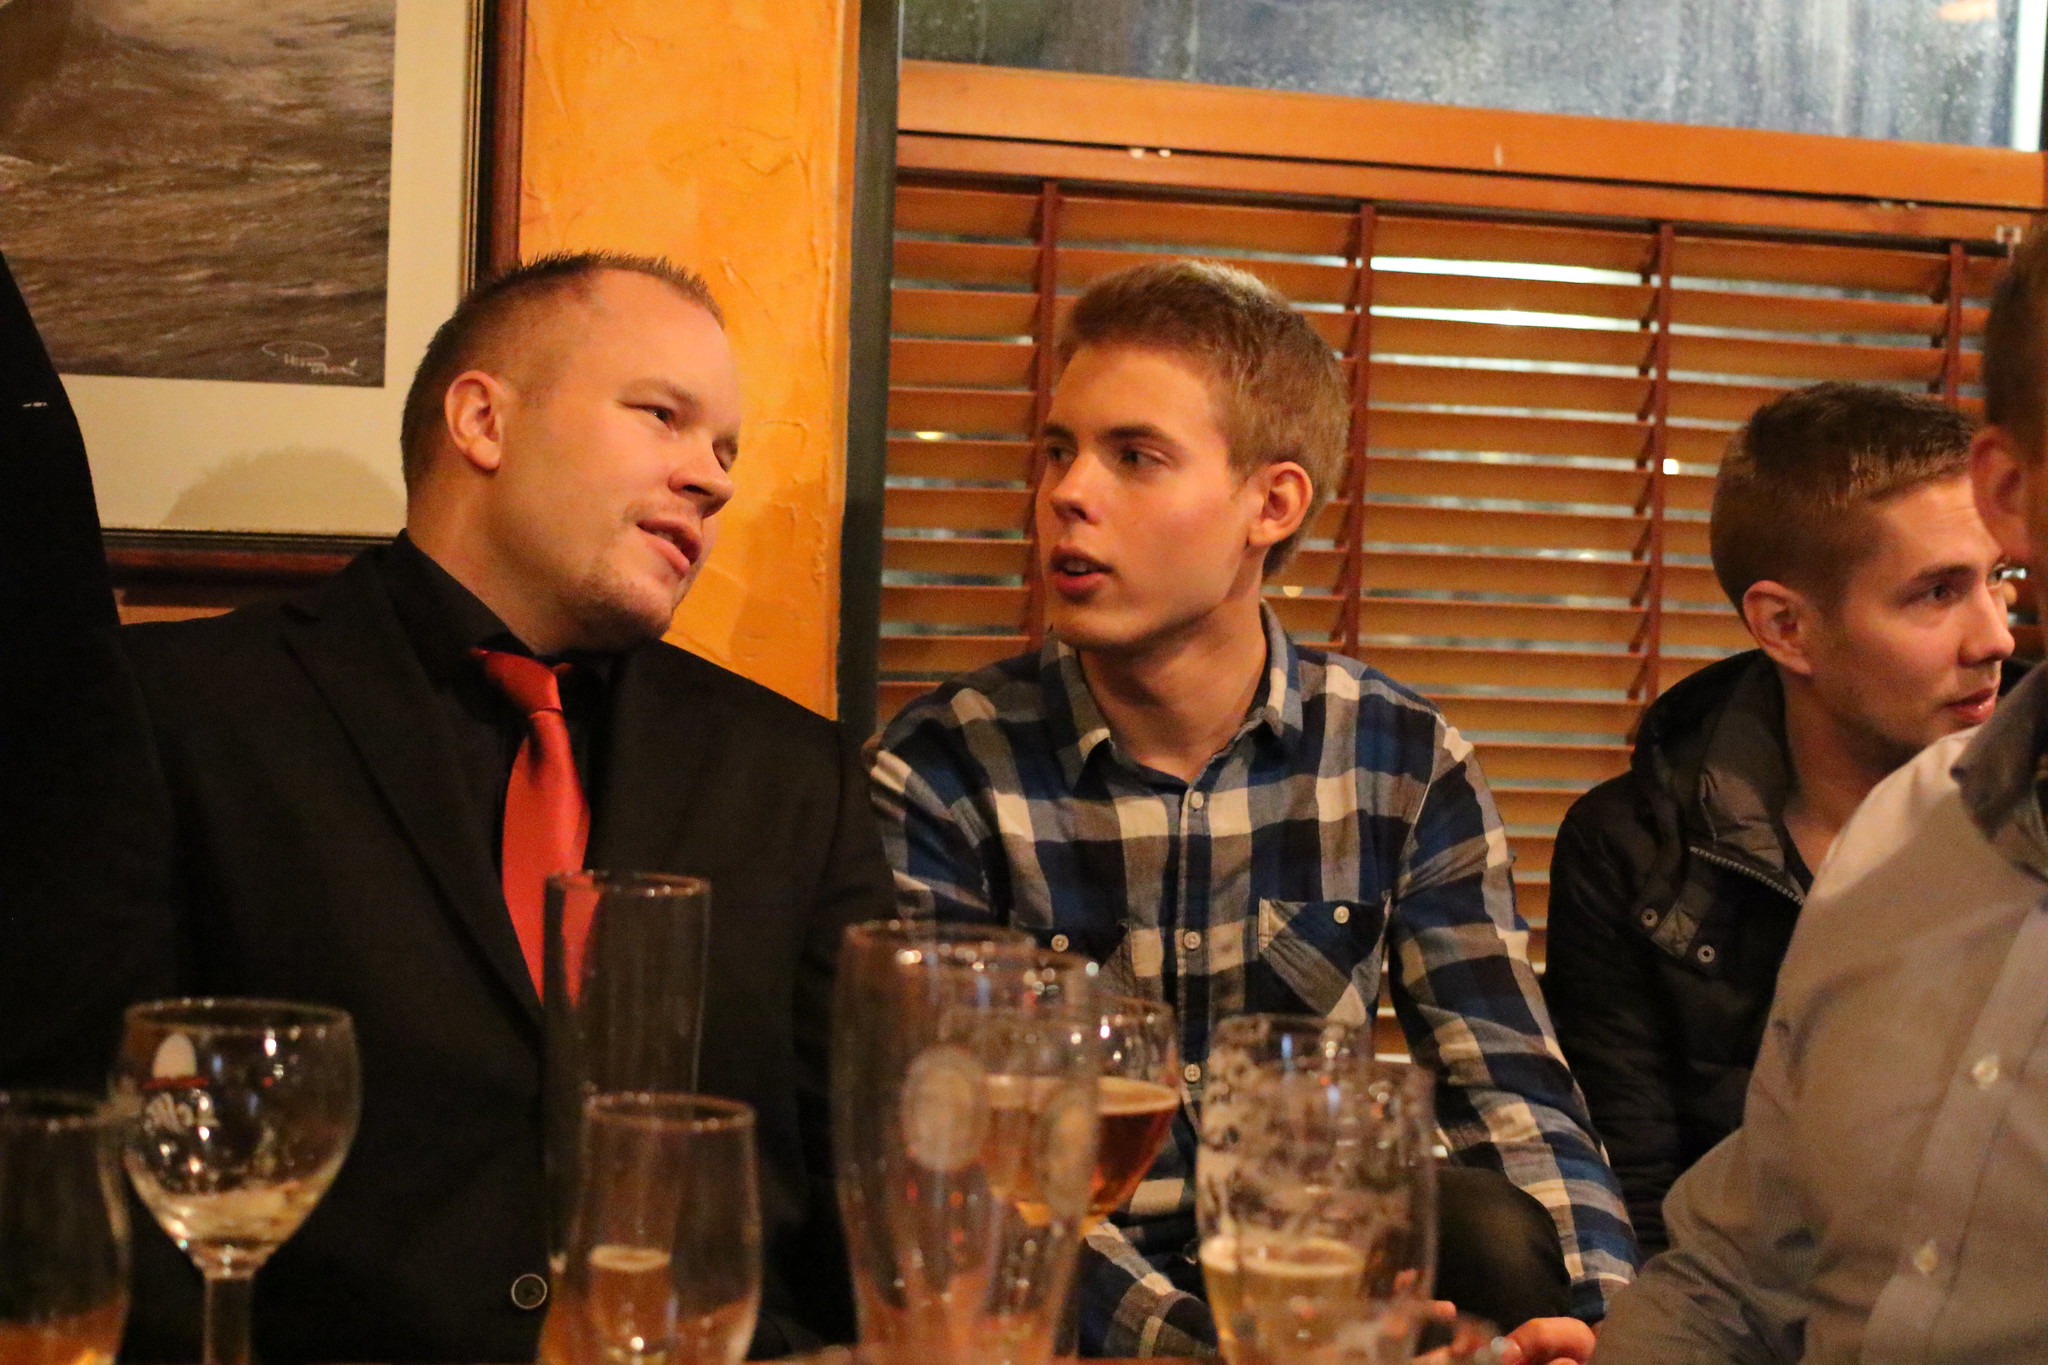 a group of men sitting and talking around a table full of partially empty glasses. The atmosphere appears to be a crowded restaurant. The men are talking with each other but appear partially distracted by something out of view.